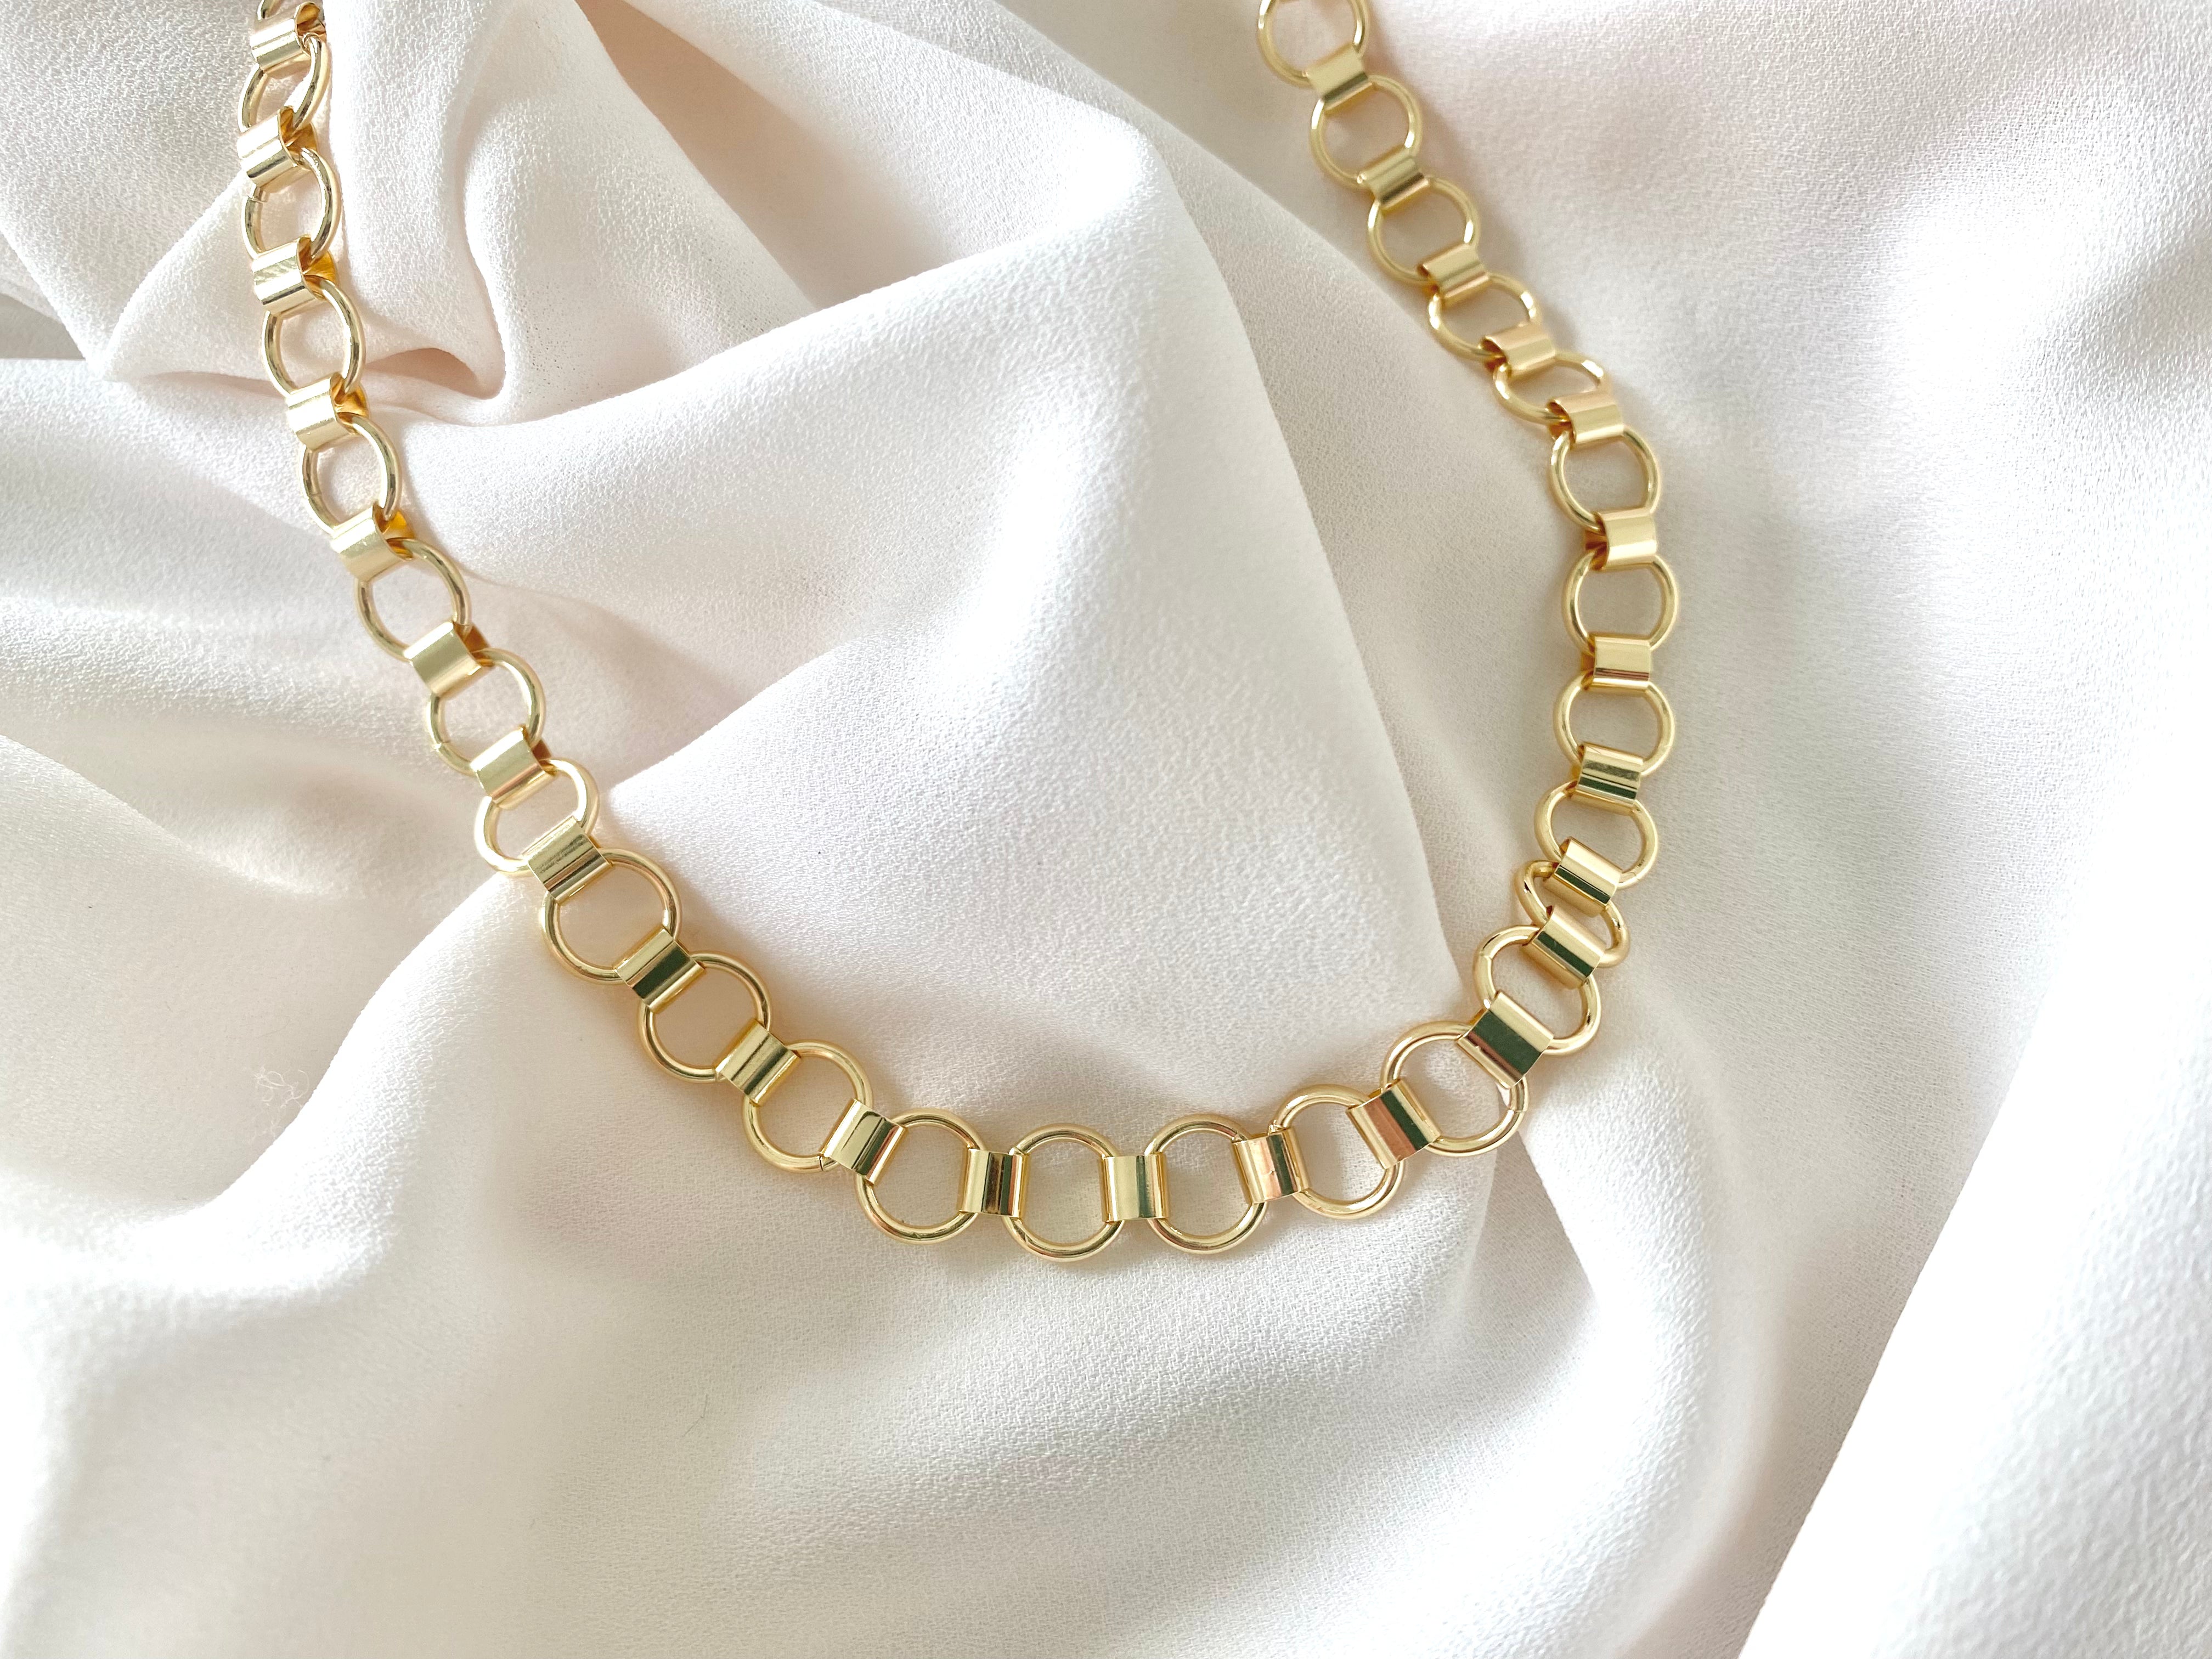 Gold Filled Chain Necklace Circle Link Chain Minimalist Layering Statement Necklaces Girlfriend Gifts Charm Necklace Chunky Links Necklace